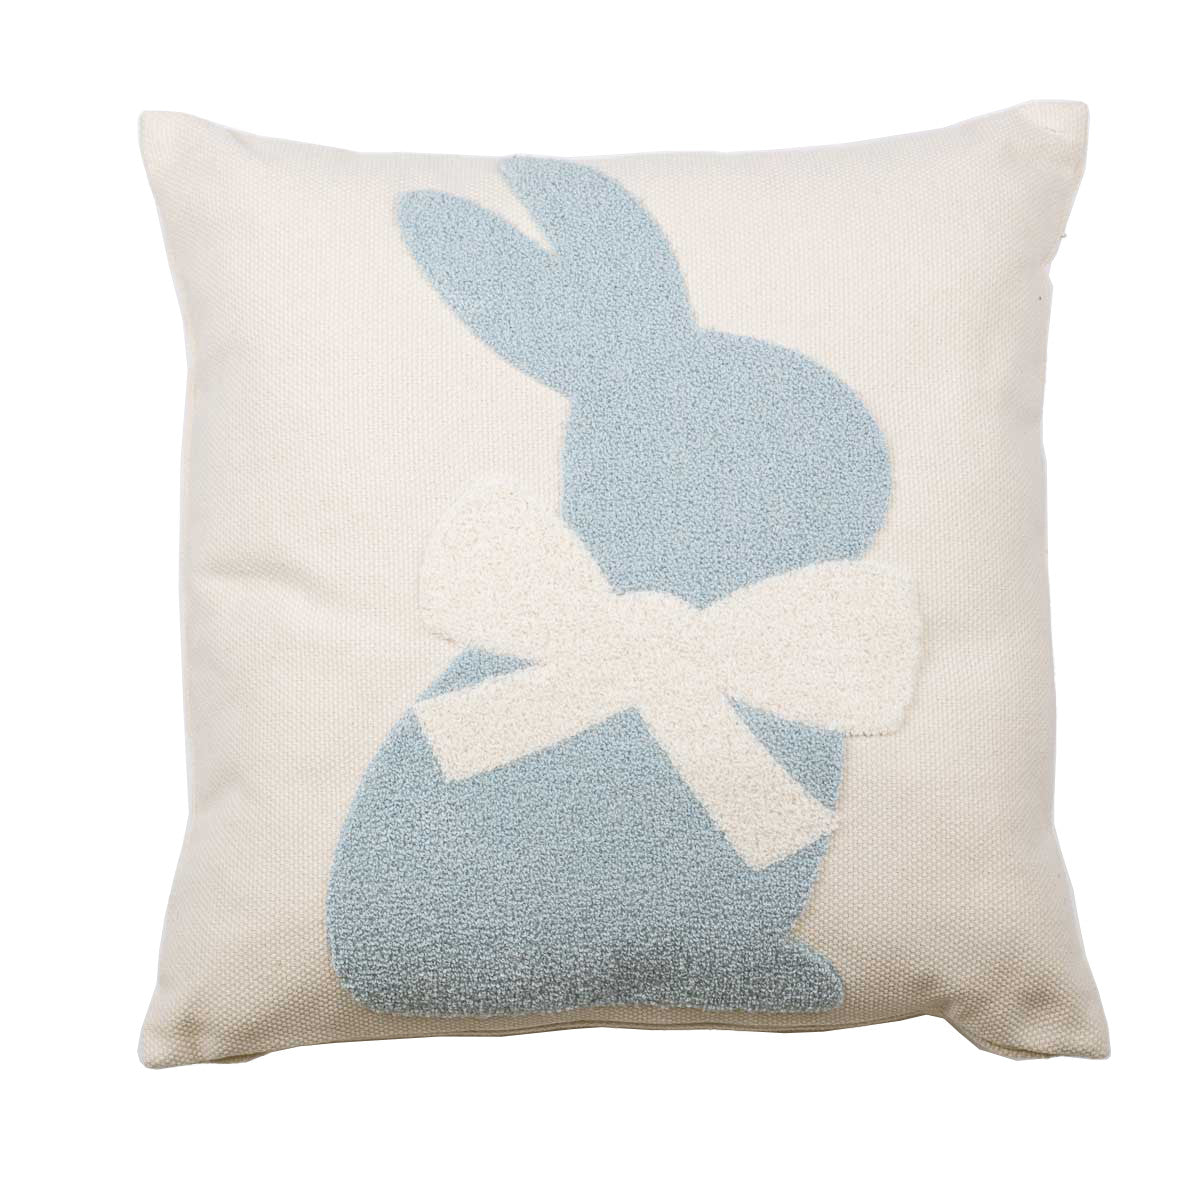 Embroidered Bunny Pillow, Color Options